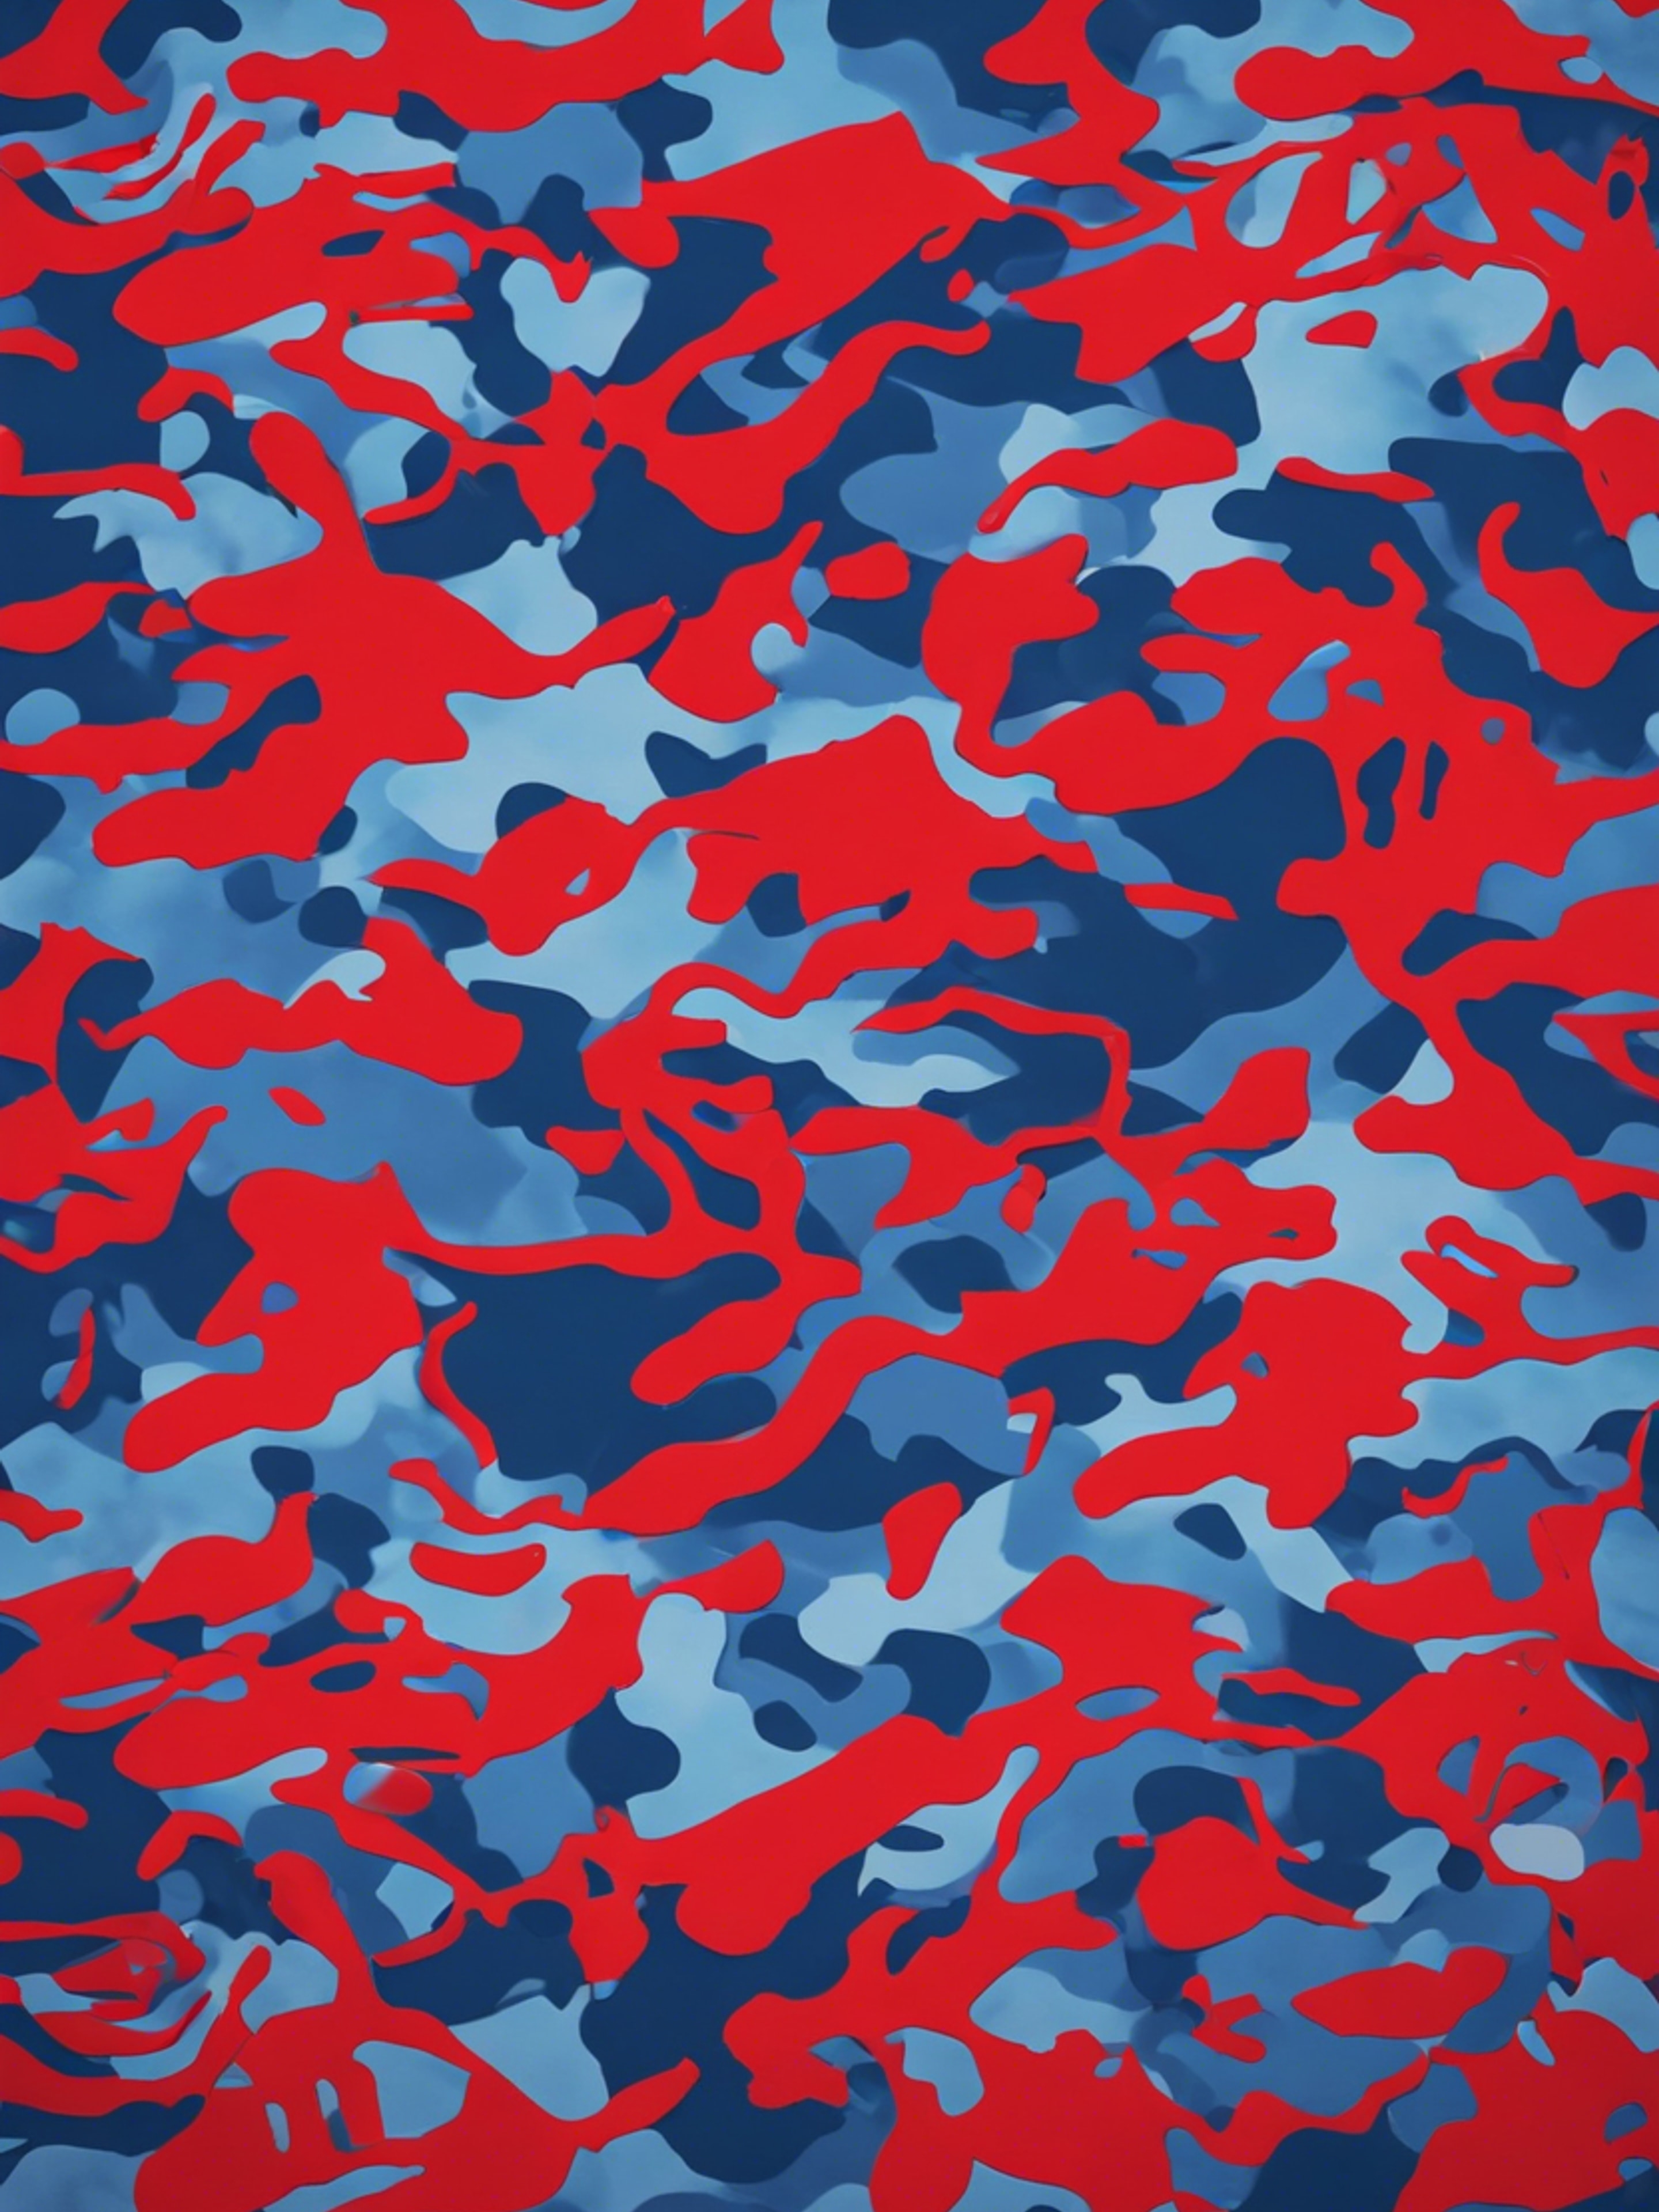 Vintage styled red and blue camouflage pattern. Wallpaper[fee228e6ab6649a28dfc]